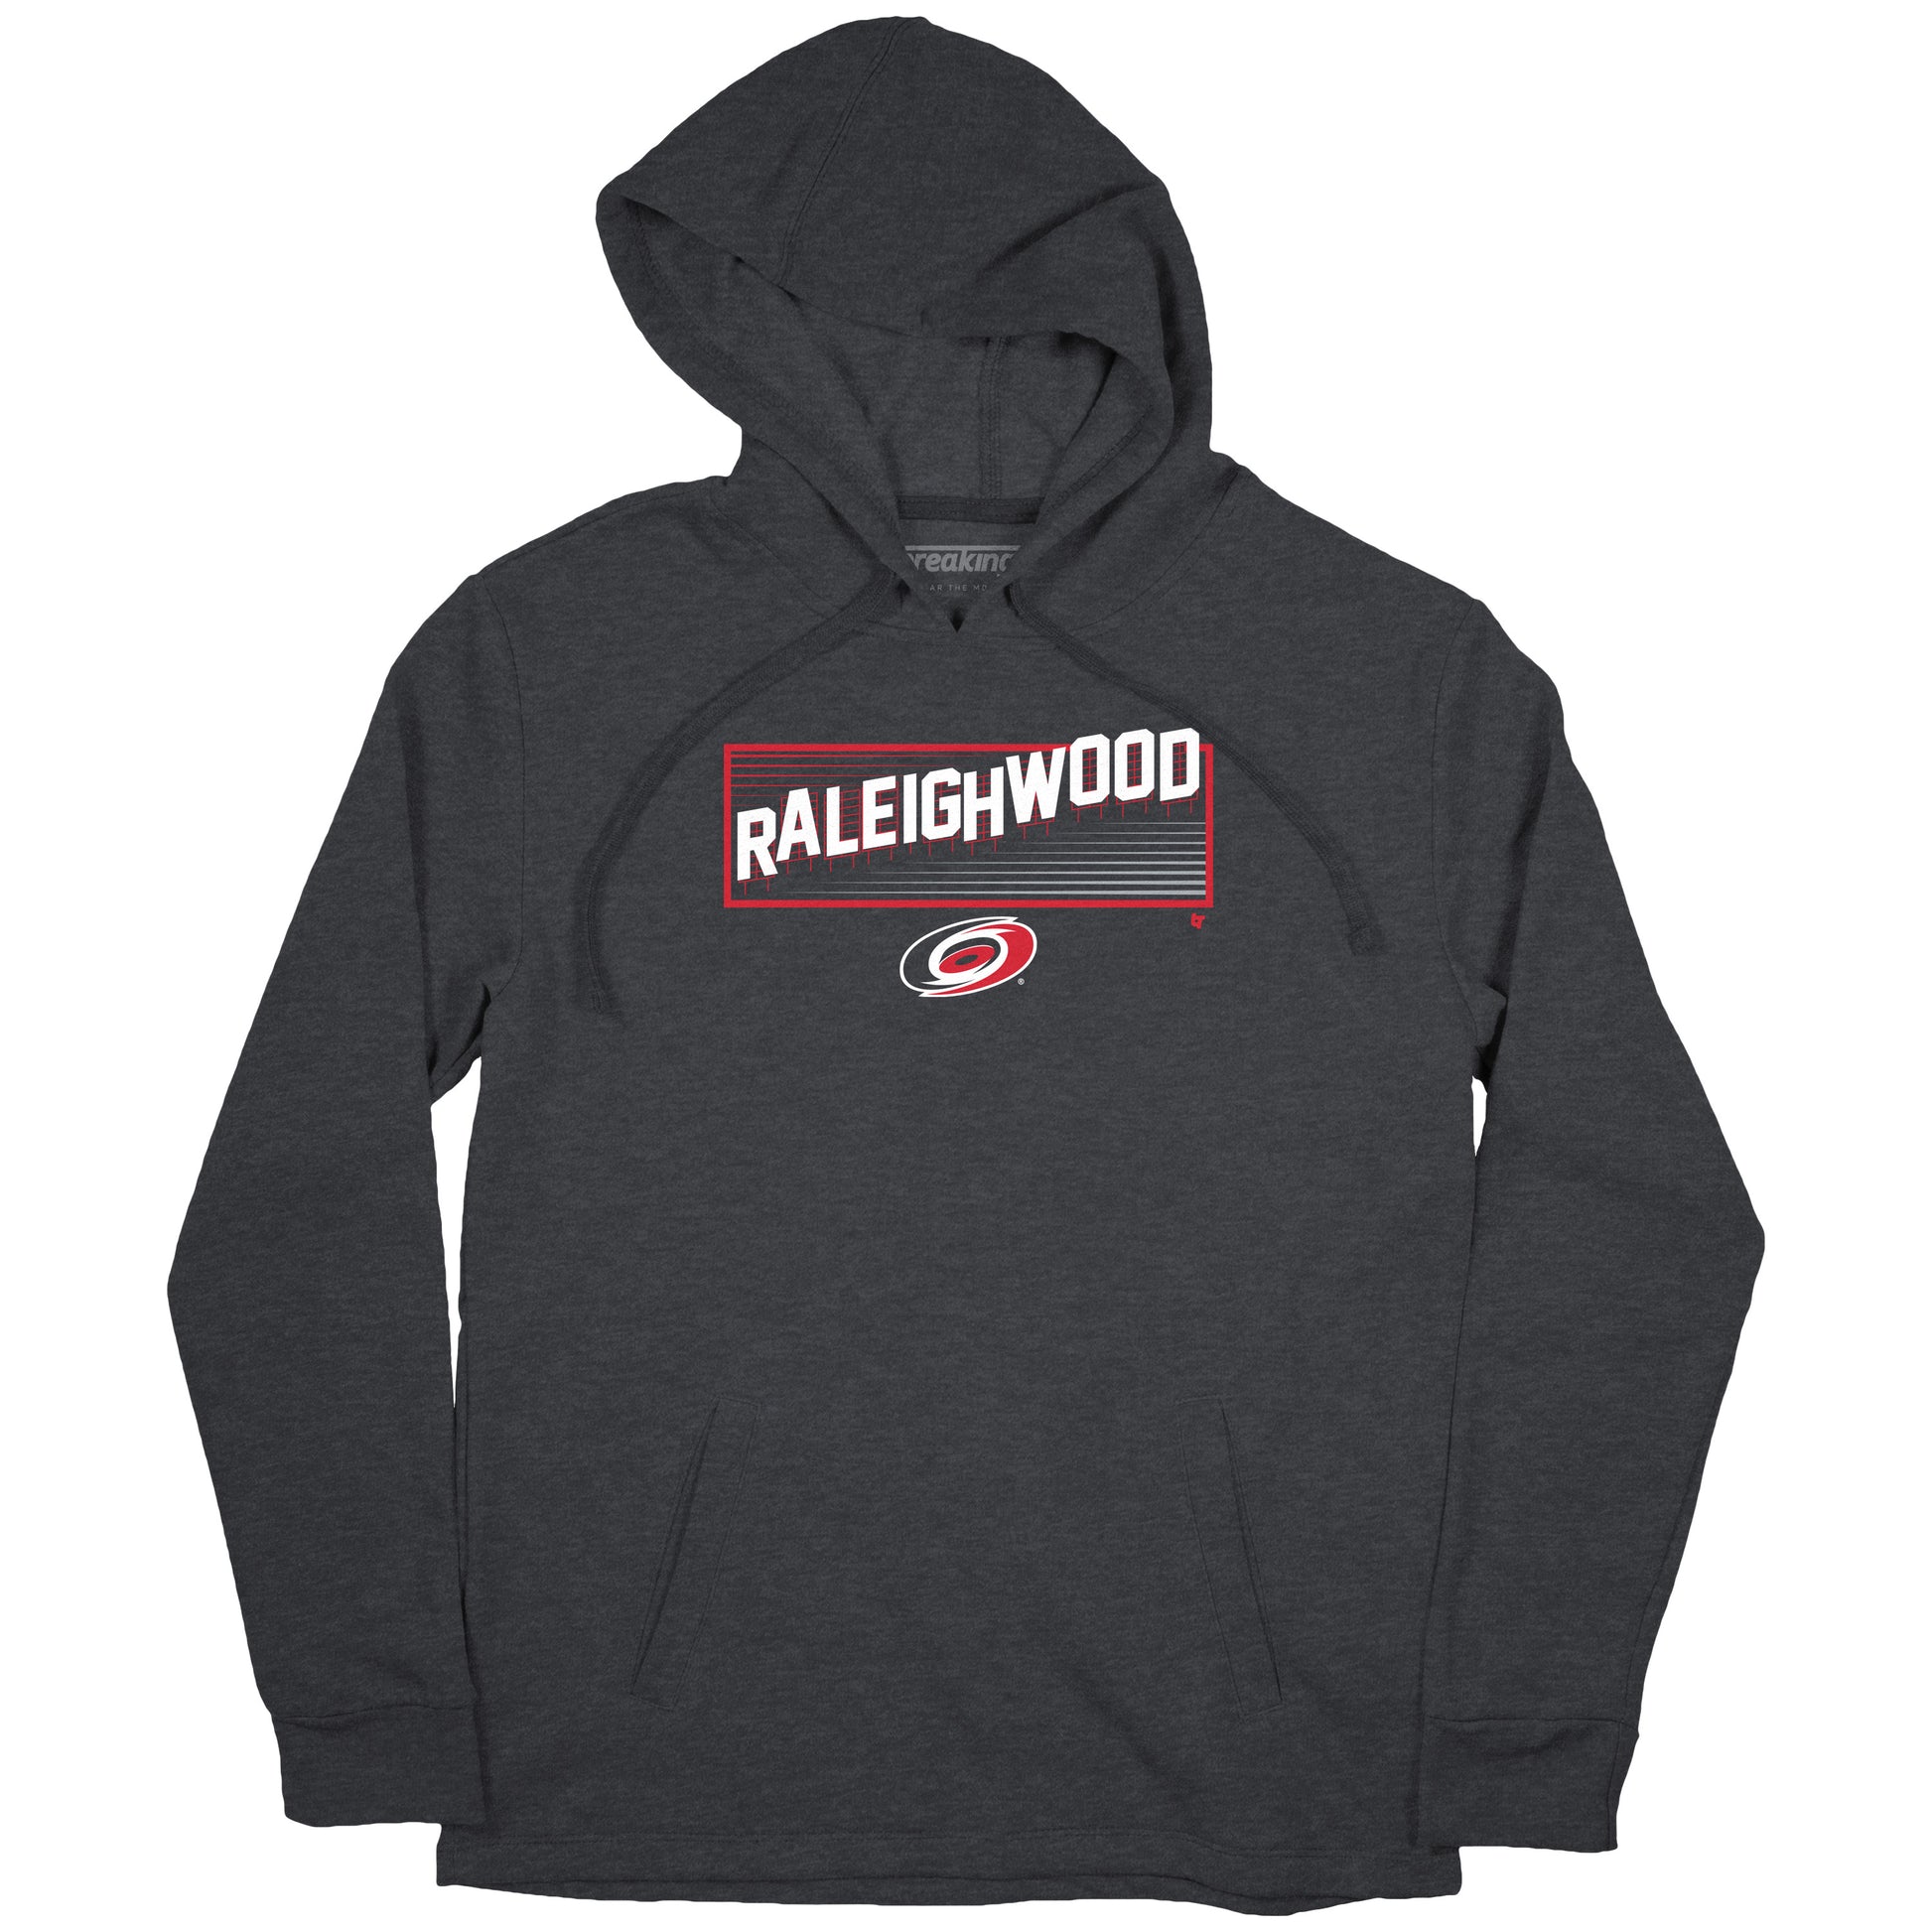 Hoodie with "Raleighwood" written in "Hollywood" sign style and Hurricanes primary logo